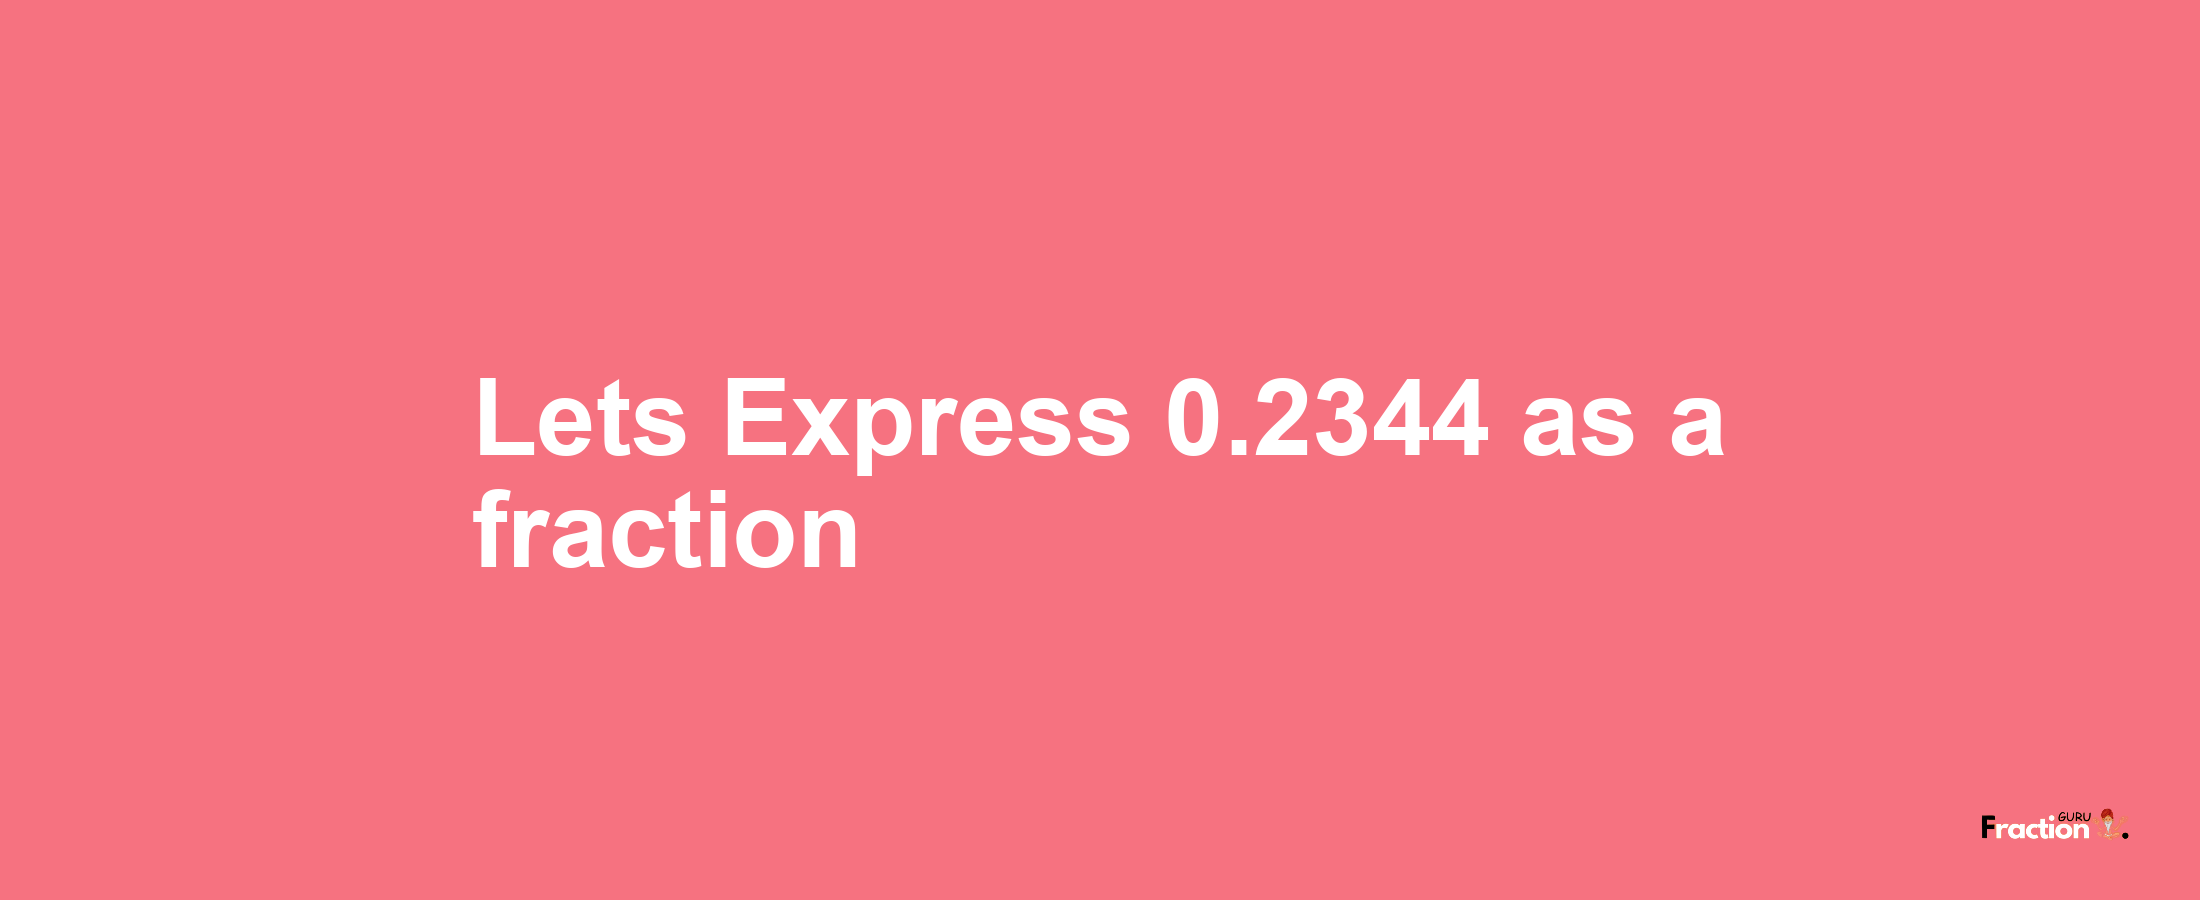 Lets Express 0.2344 as afraction